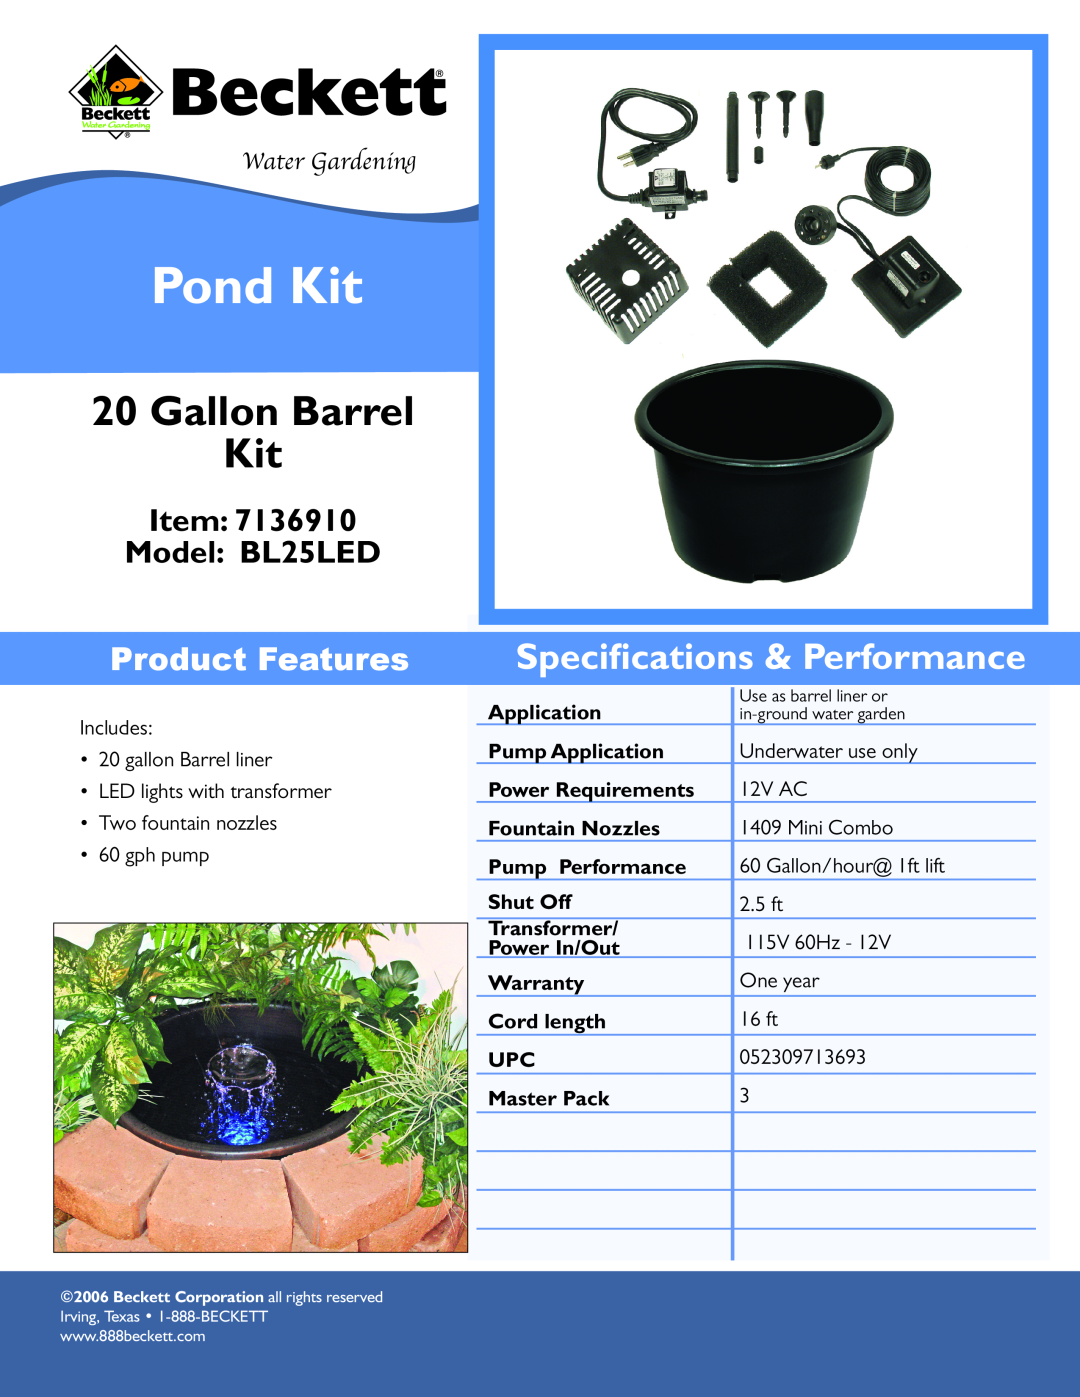 Beckett Water Gardening BL25LED specifications Pond Kit, Gallon Barrel Kit, Speciﬁcations & Performance, Product Features 